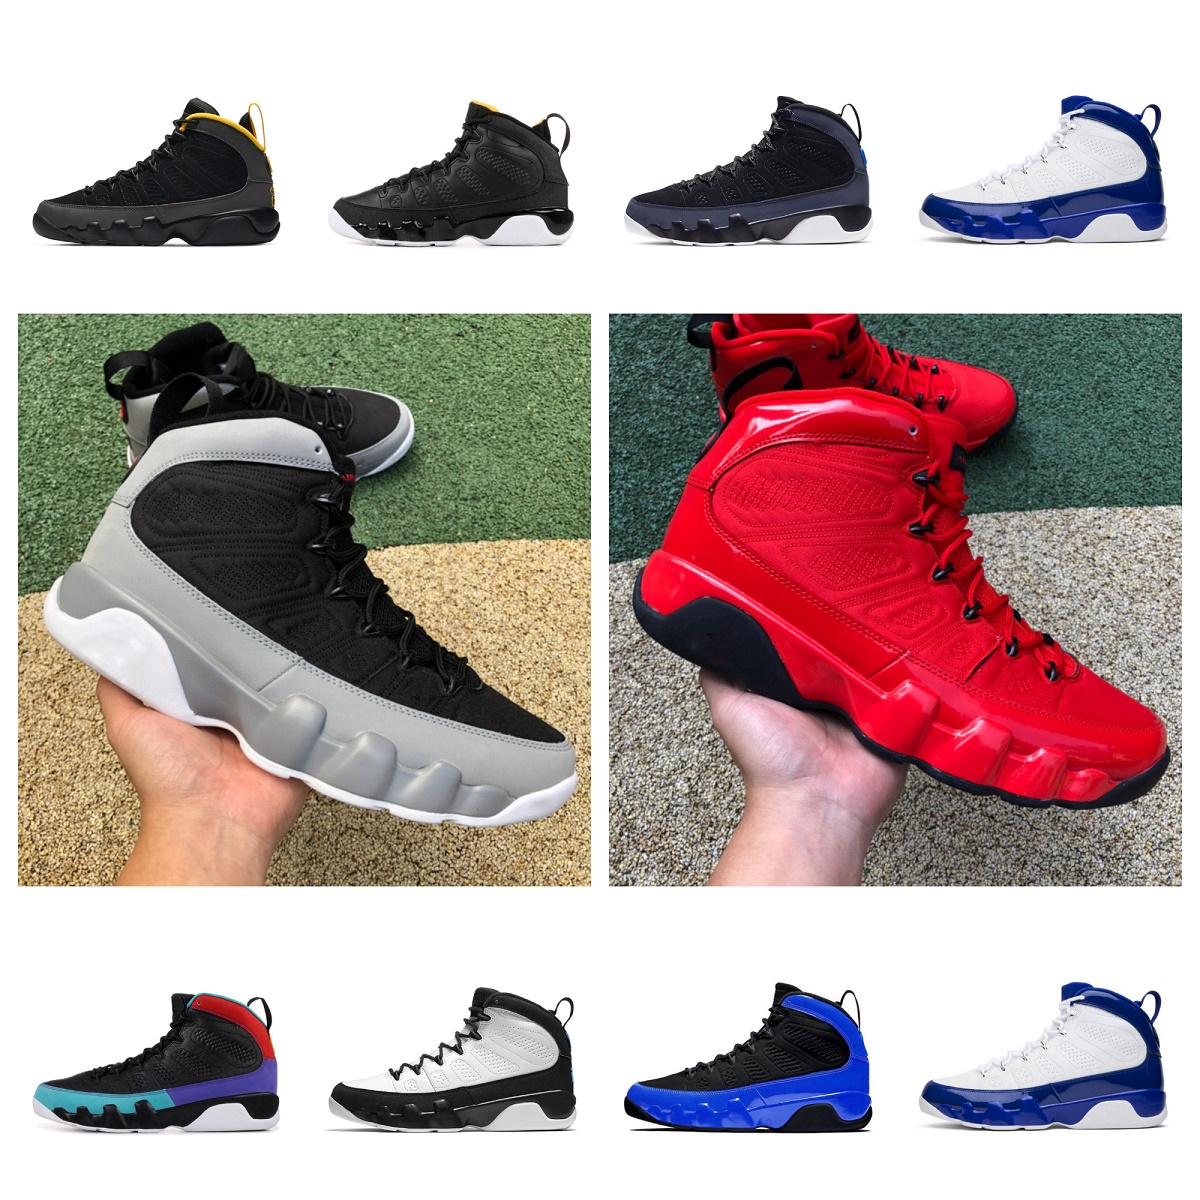 

Jumpman 9 9s OG Basketball Shoes Mens Chile Red University Blue Gold Barons Particle Grey Bred Patent Space Jace Dark Charcoal Cool Grey Men Trainers Sports Sneakers, Bubble package bag